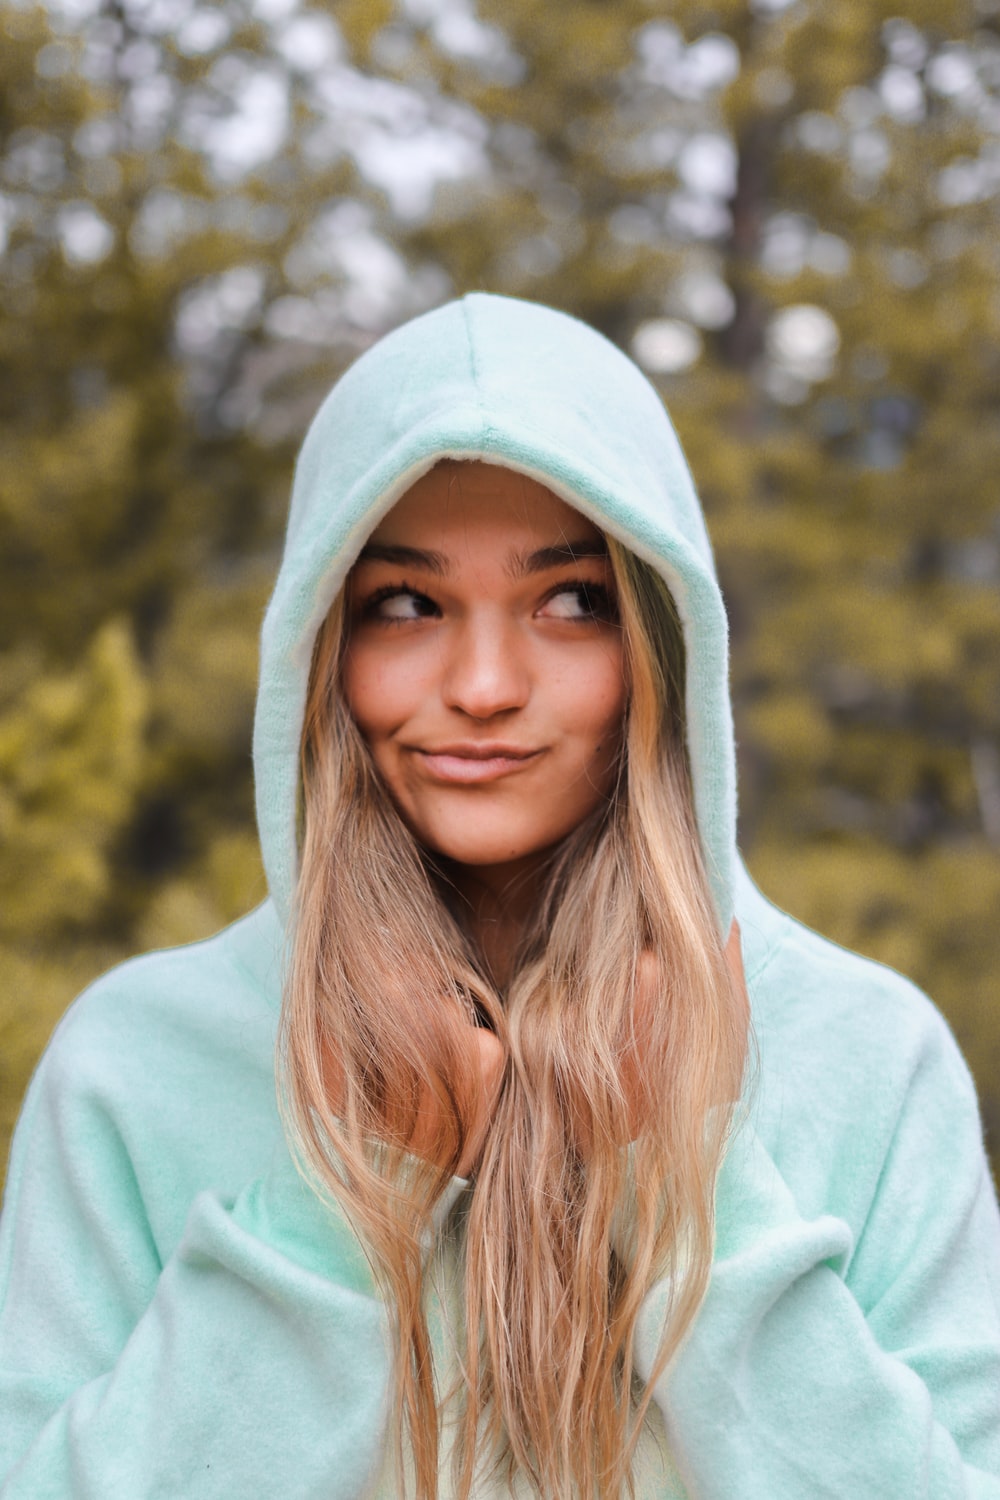 Hoodie Girl Picture. Download Free Image